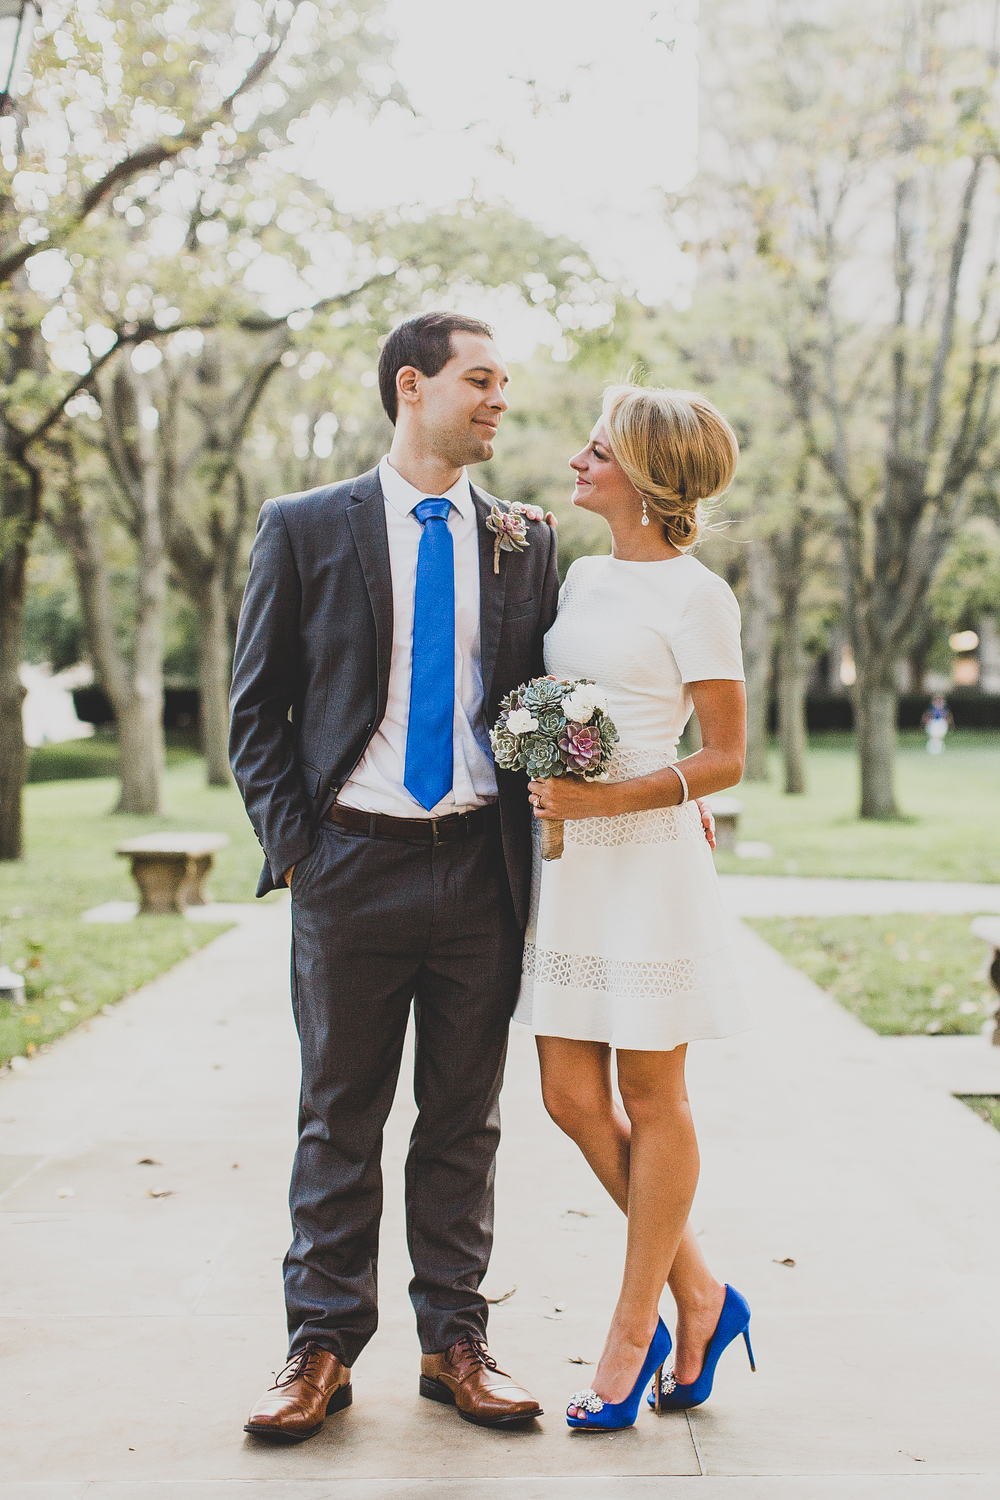 Gorgeous bride and groom wearing matching navy blue tie and shoes and a stunning little white dress. // See more: 20 Stunning Civil Wedding Outfit Ideas to Make it Official In Style. // mysweetengagement.com